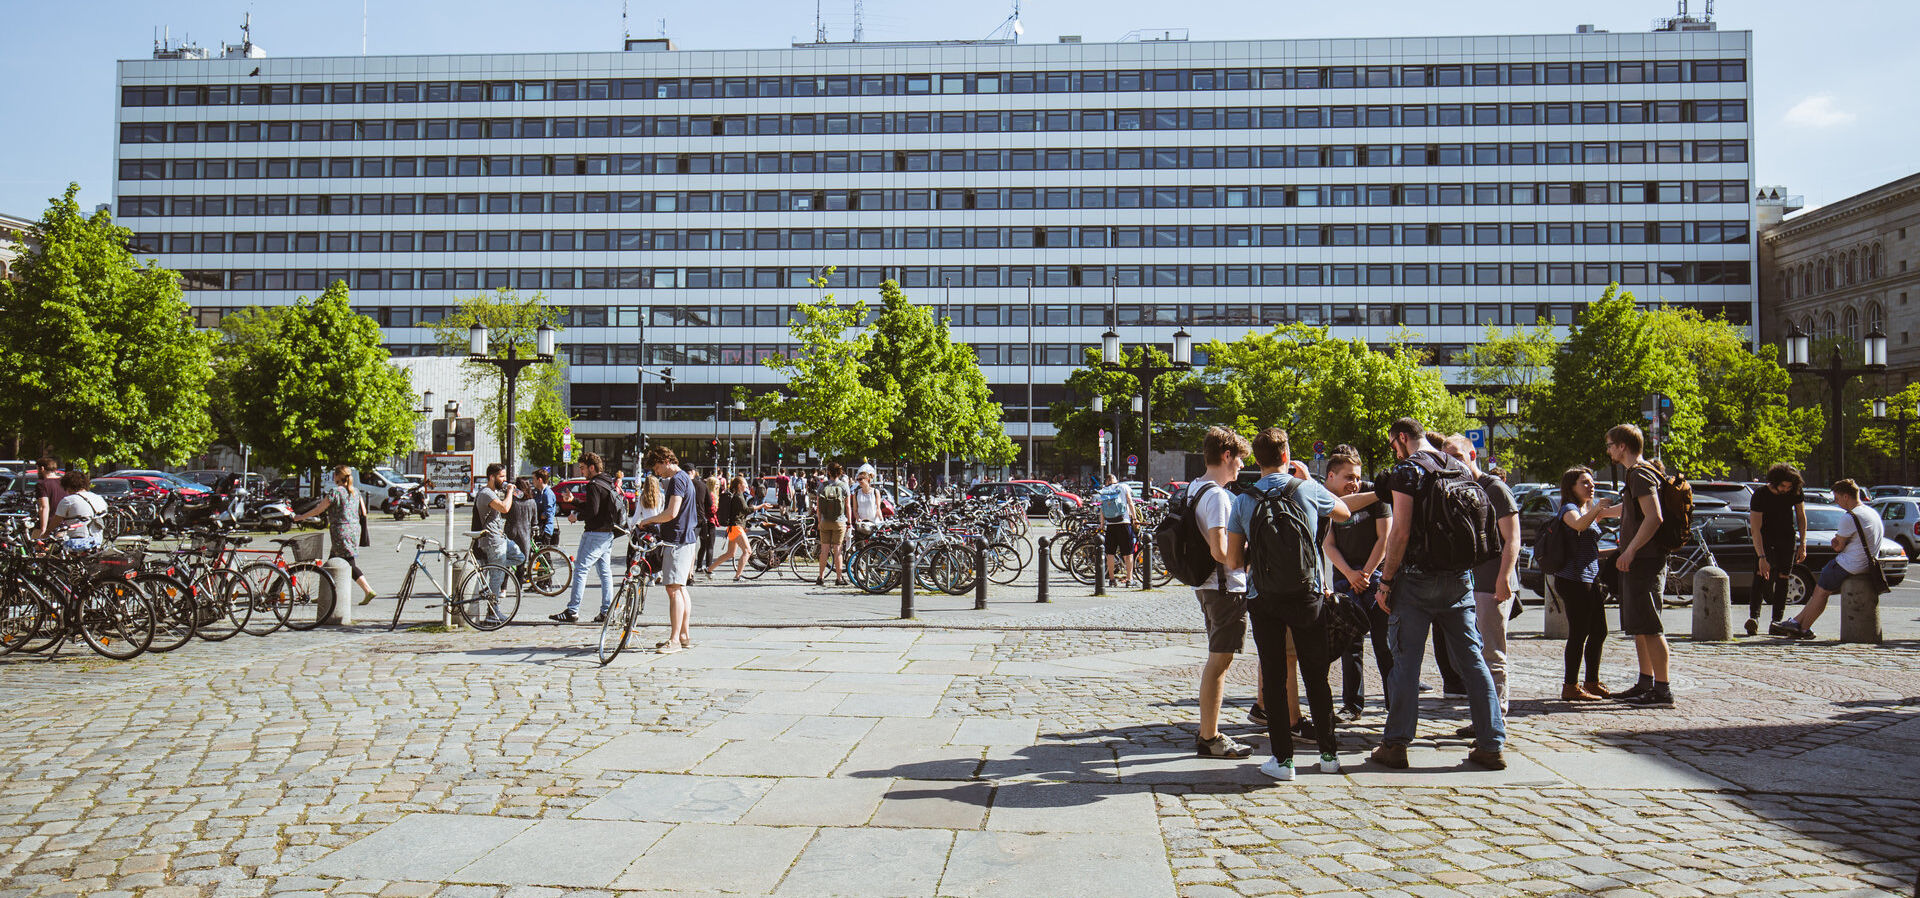 View of TU Berlins main building across Straße des 17. Juni in sunshine, students are standing in groups